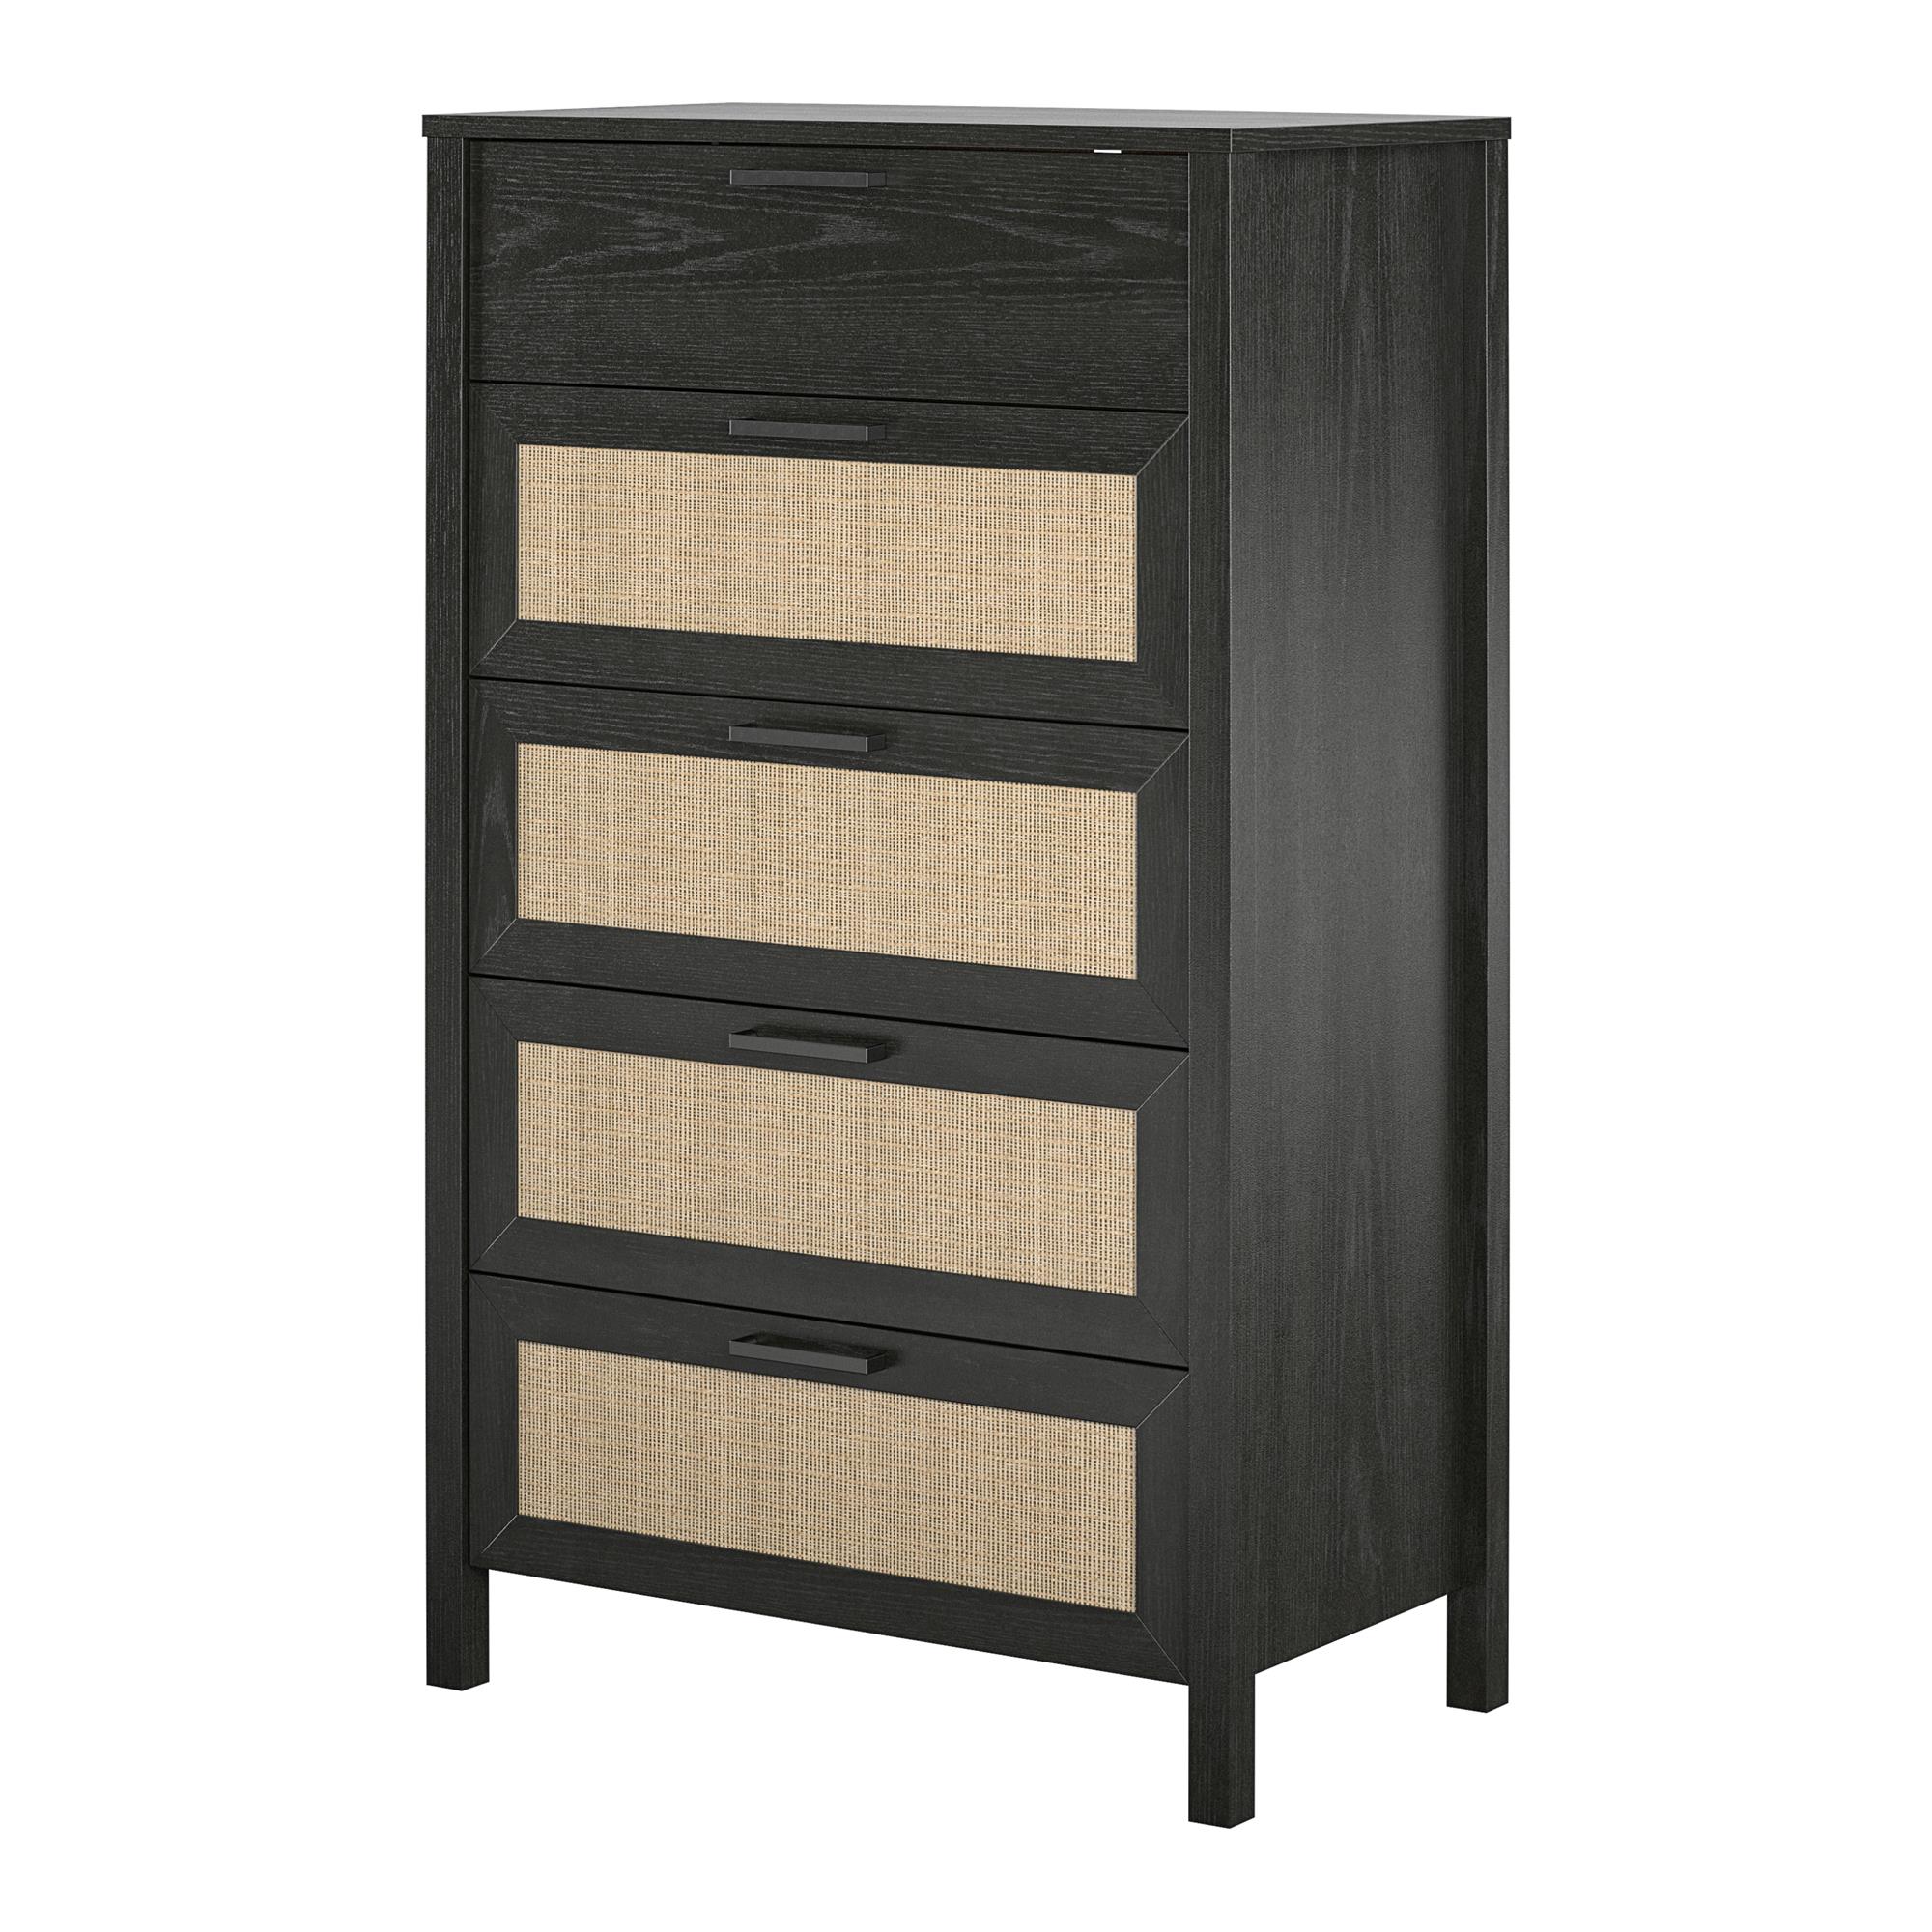 Ameriwood Home Wimberly 5-Drawer Dresser, Black Oak with Faux Rattan - image 2 of 14